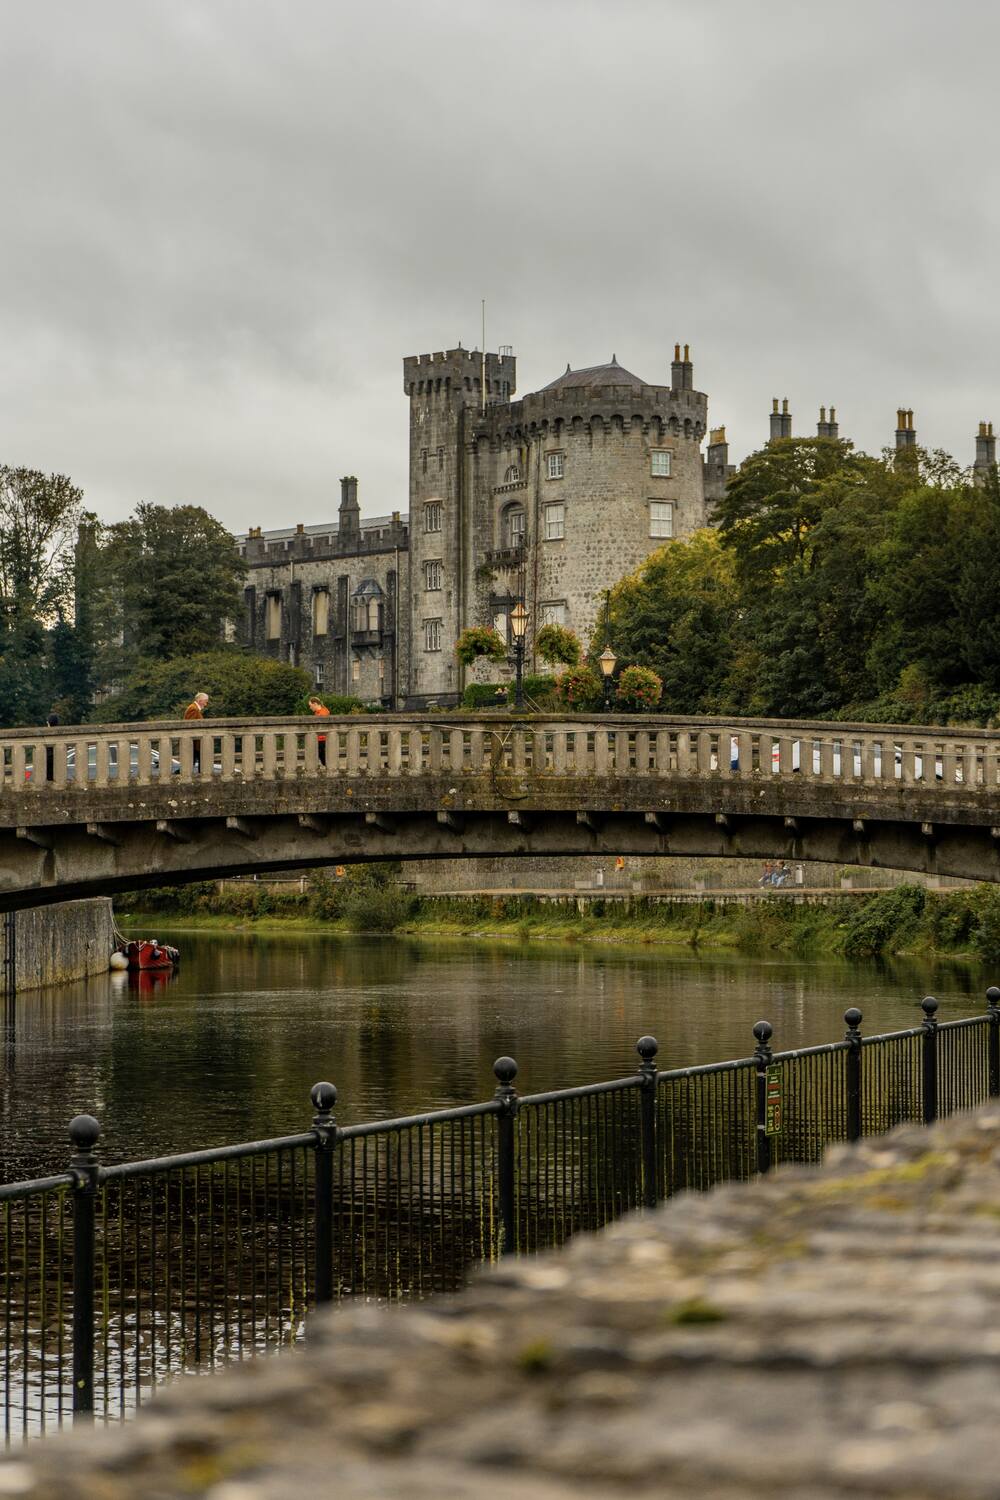 Kilkenny Castle from the River